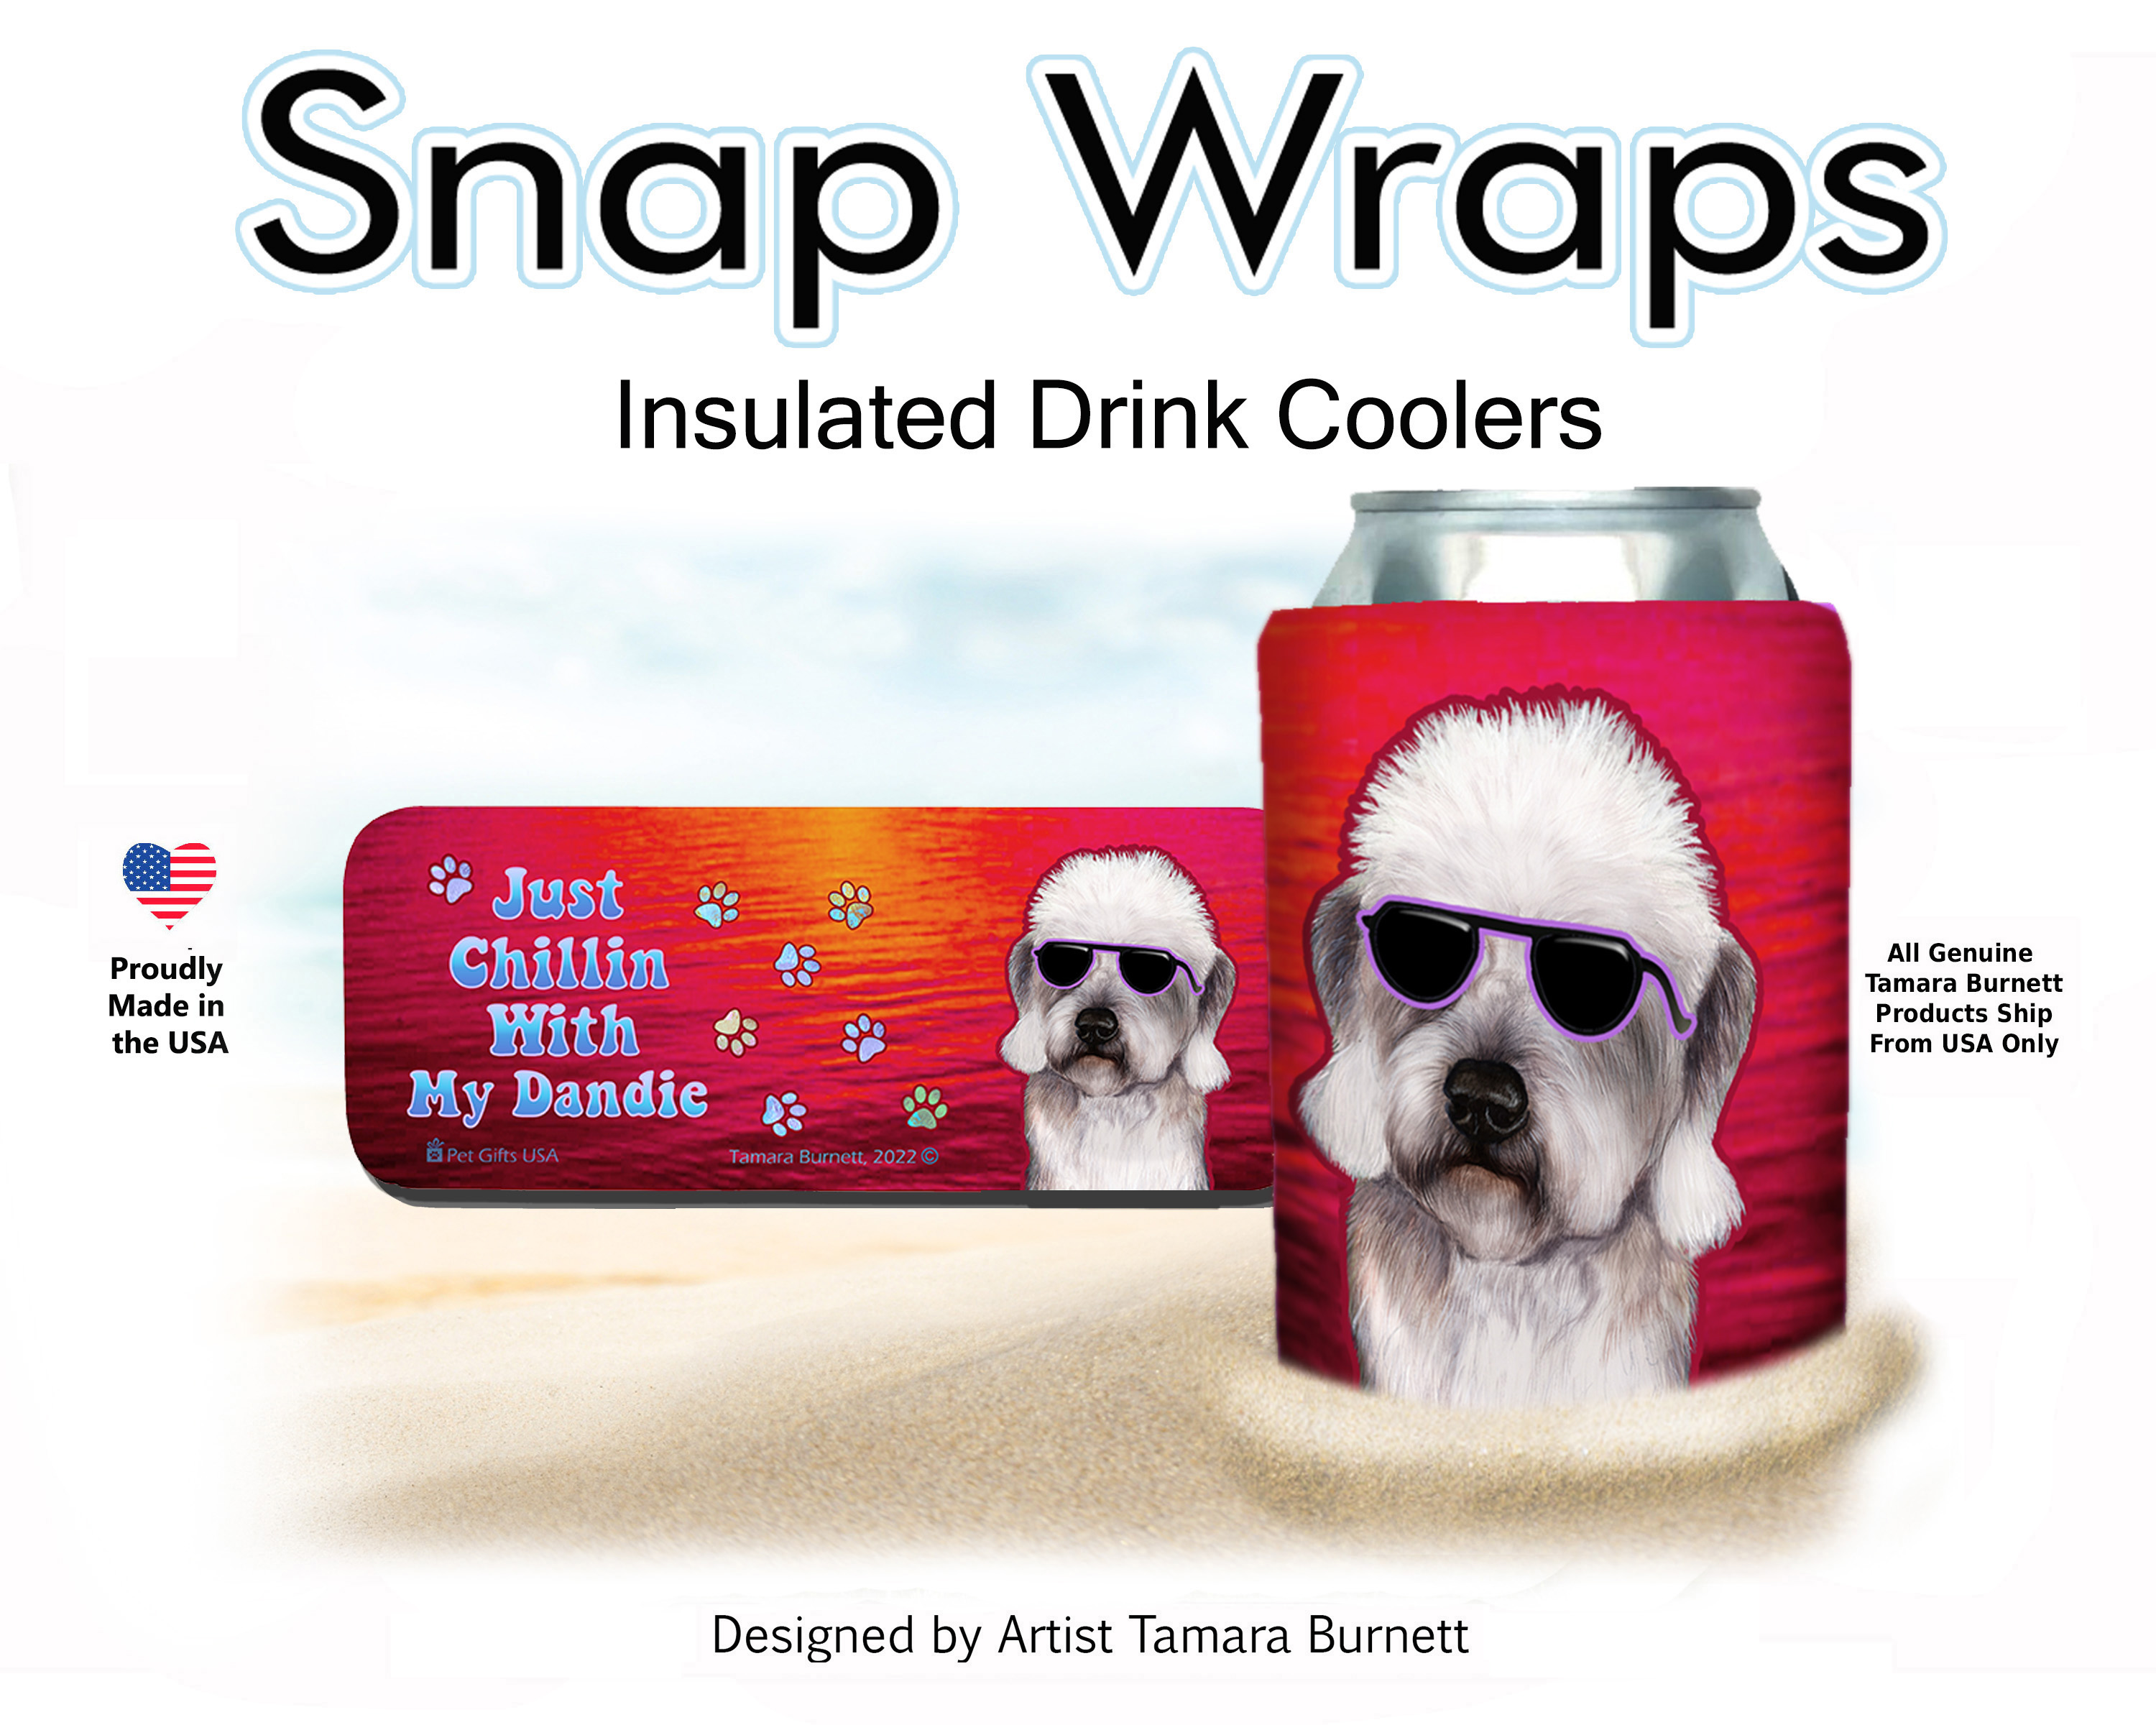 Dandie Dinmont Terrier Pepper Snap Wrap Insulated Drink Holder image